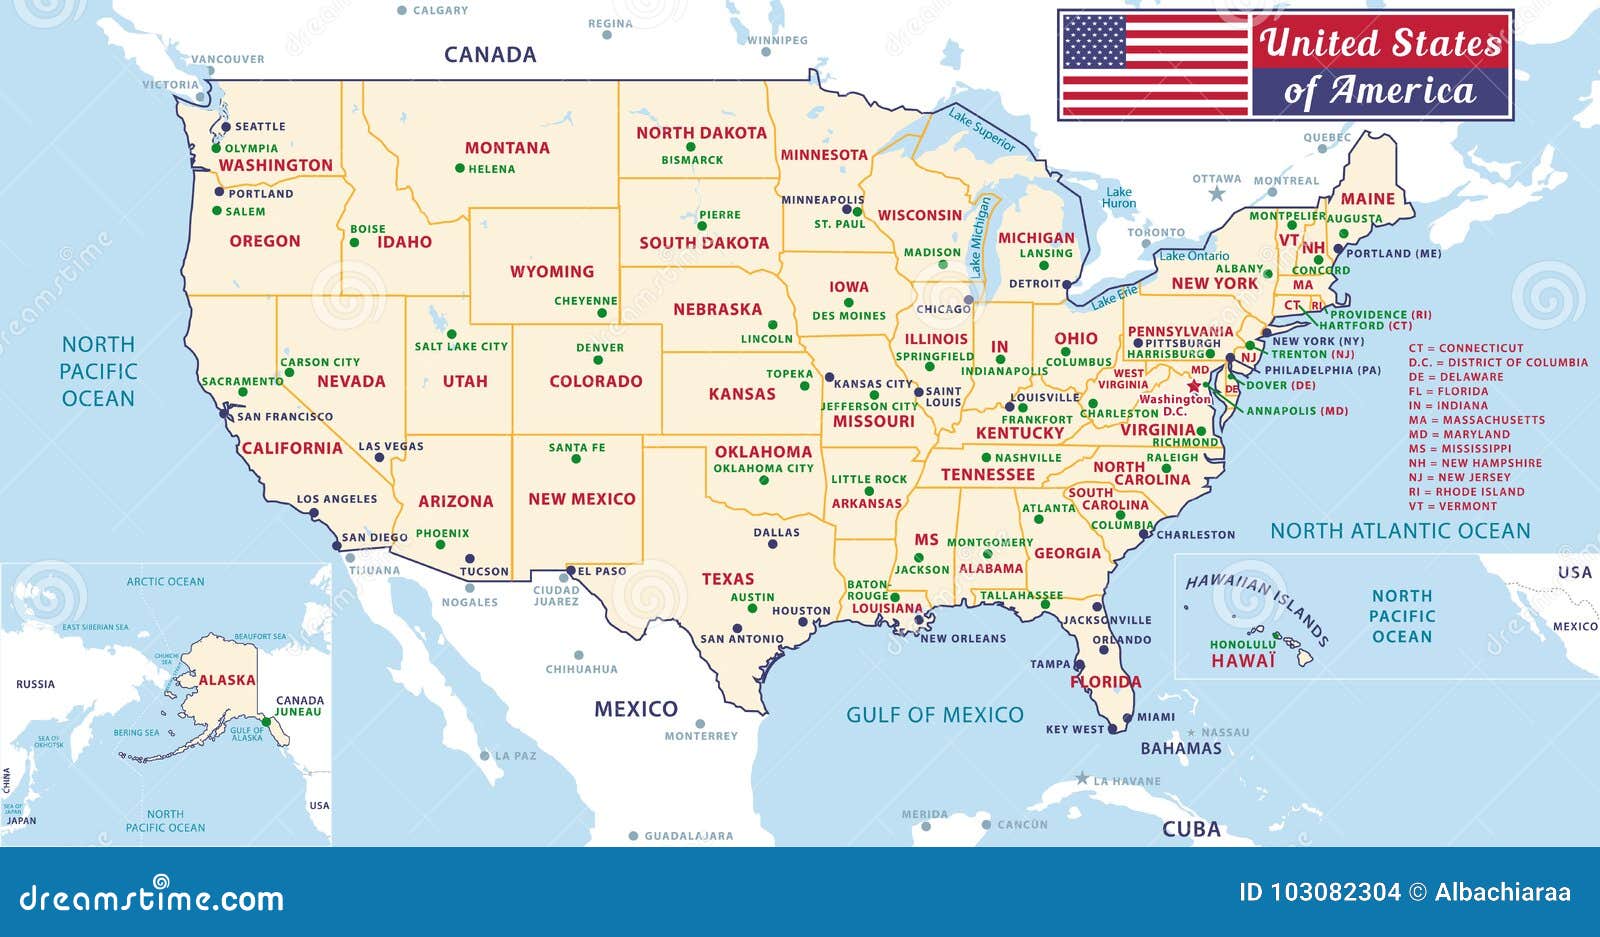 The United States Of America Capital States And Major Cities Map